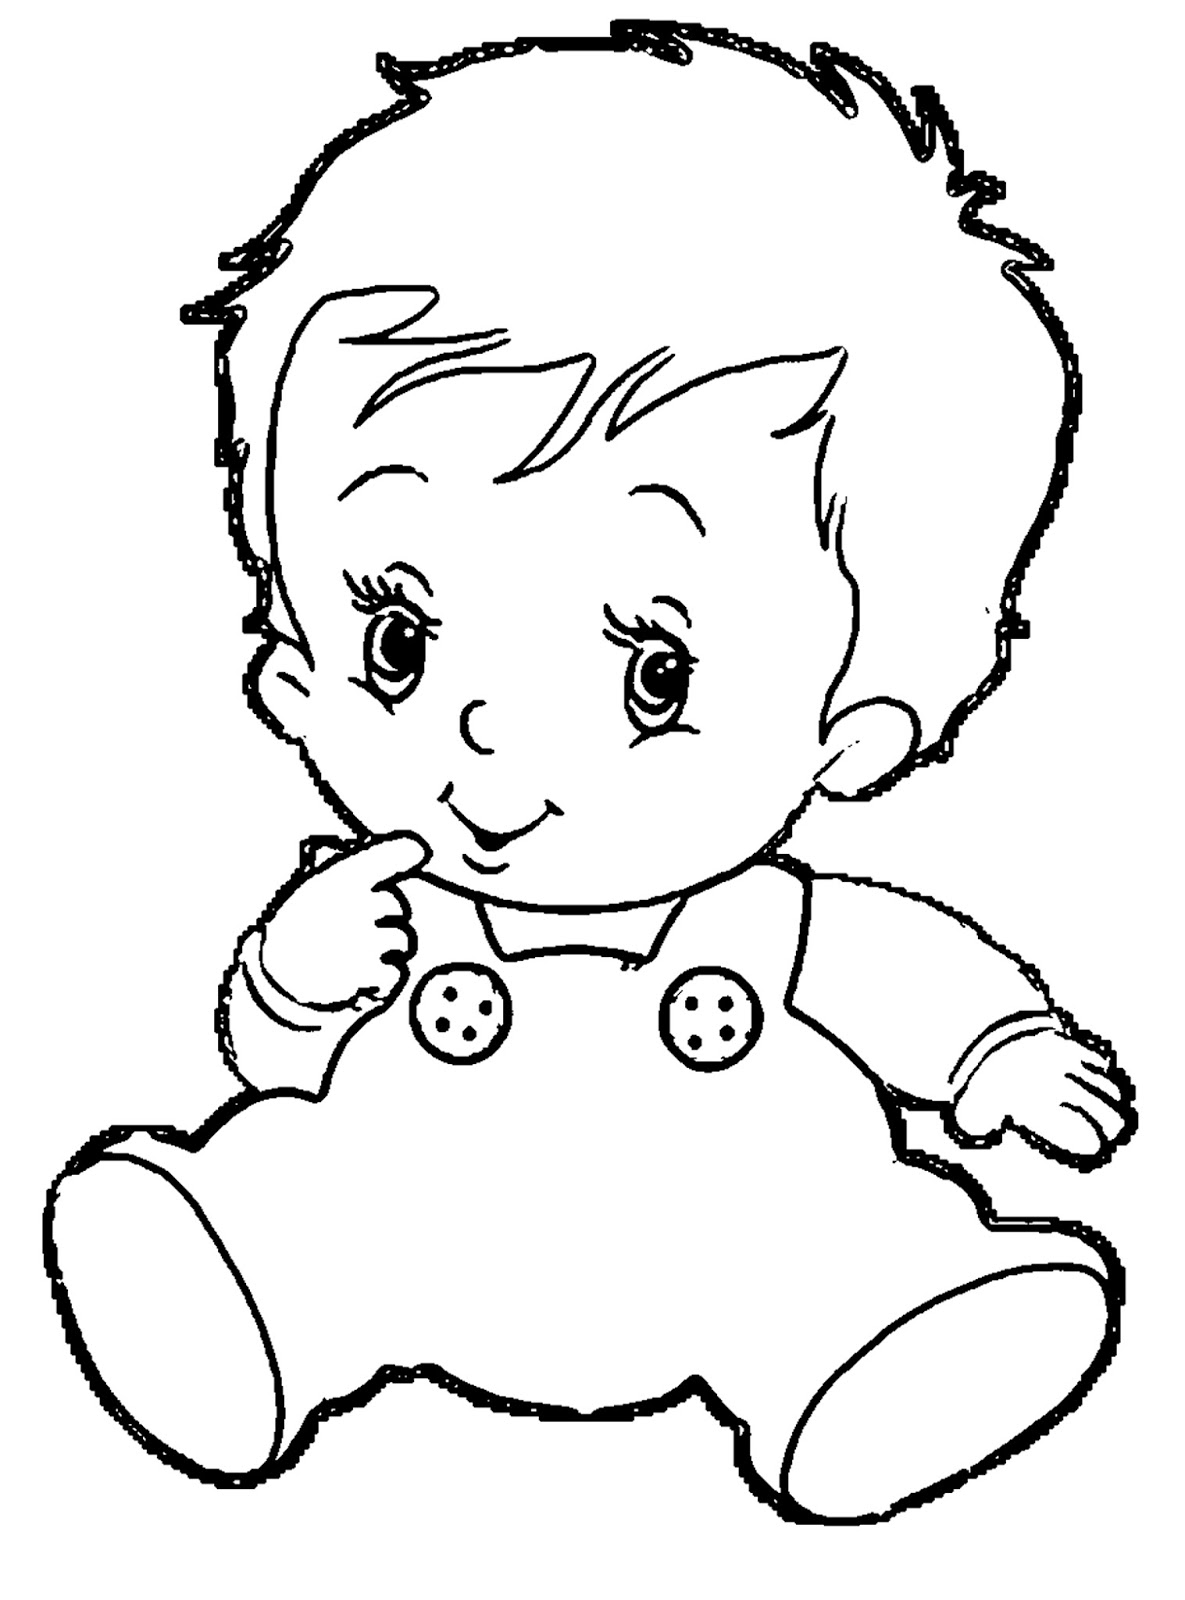 Clipart Black And White Baby.